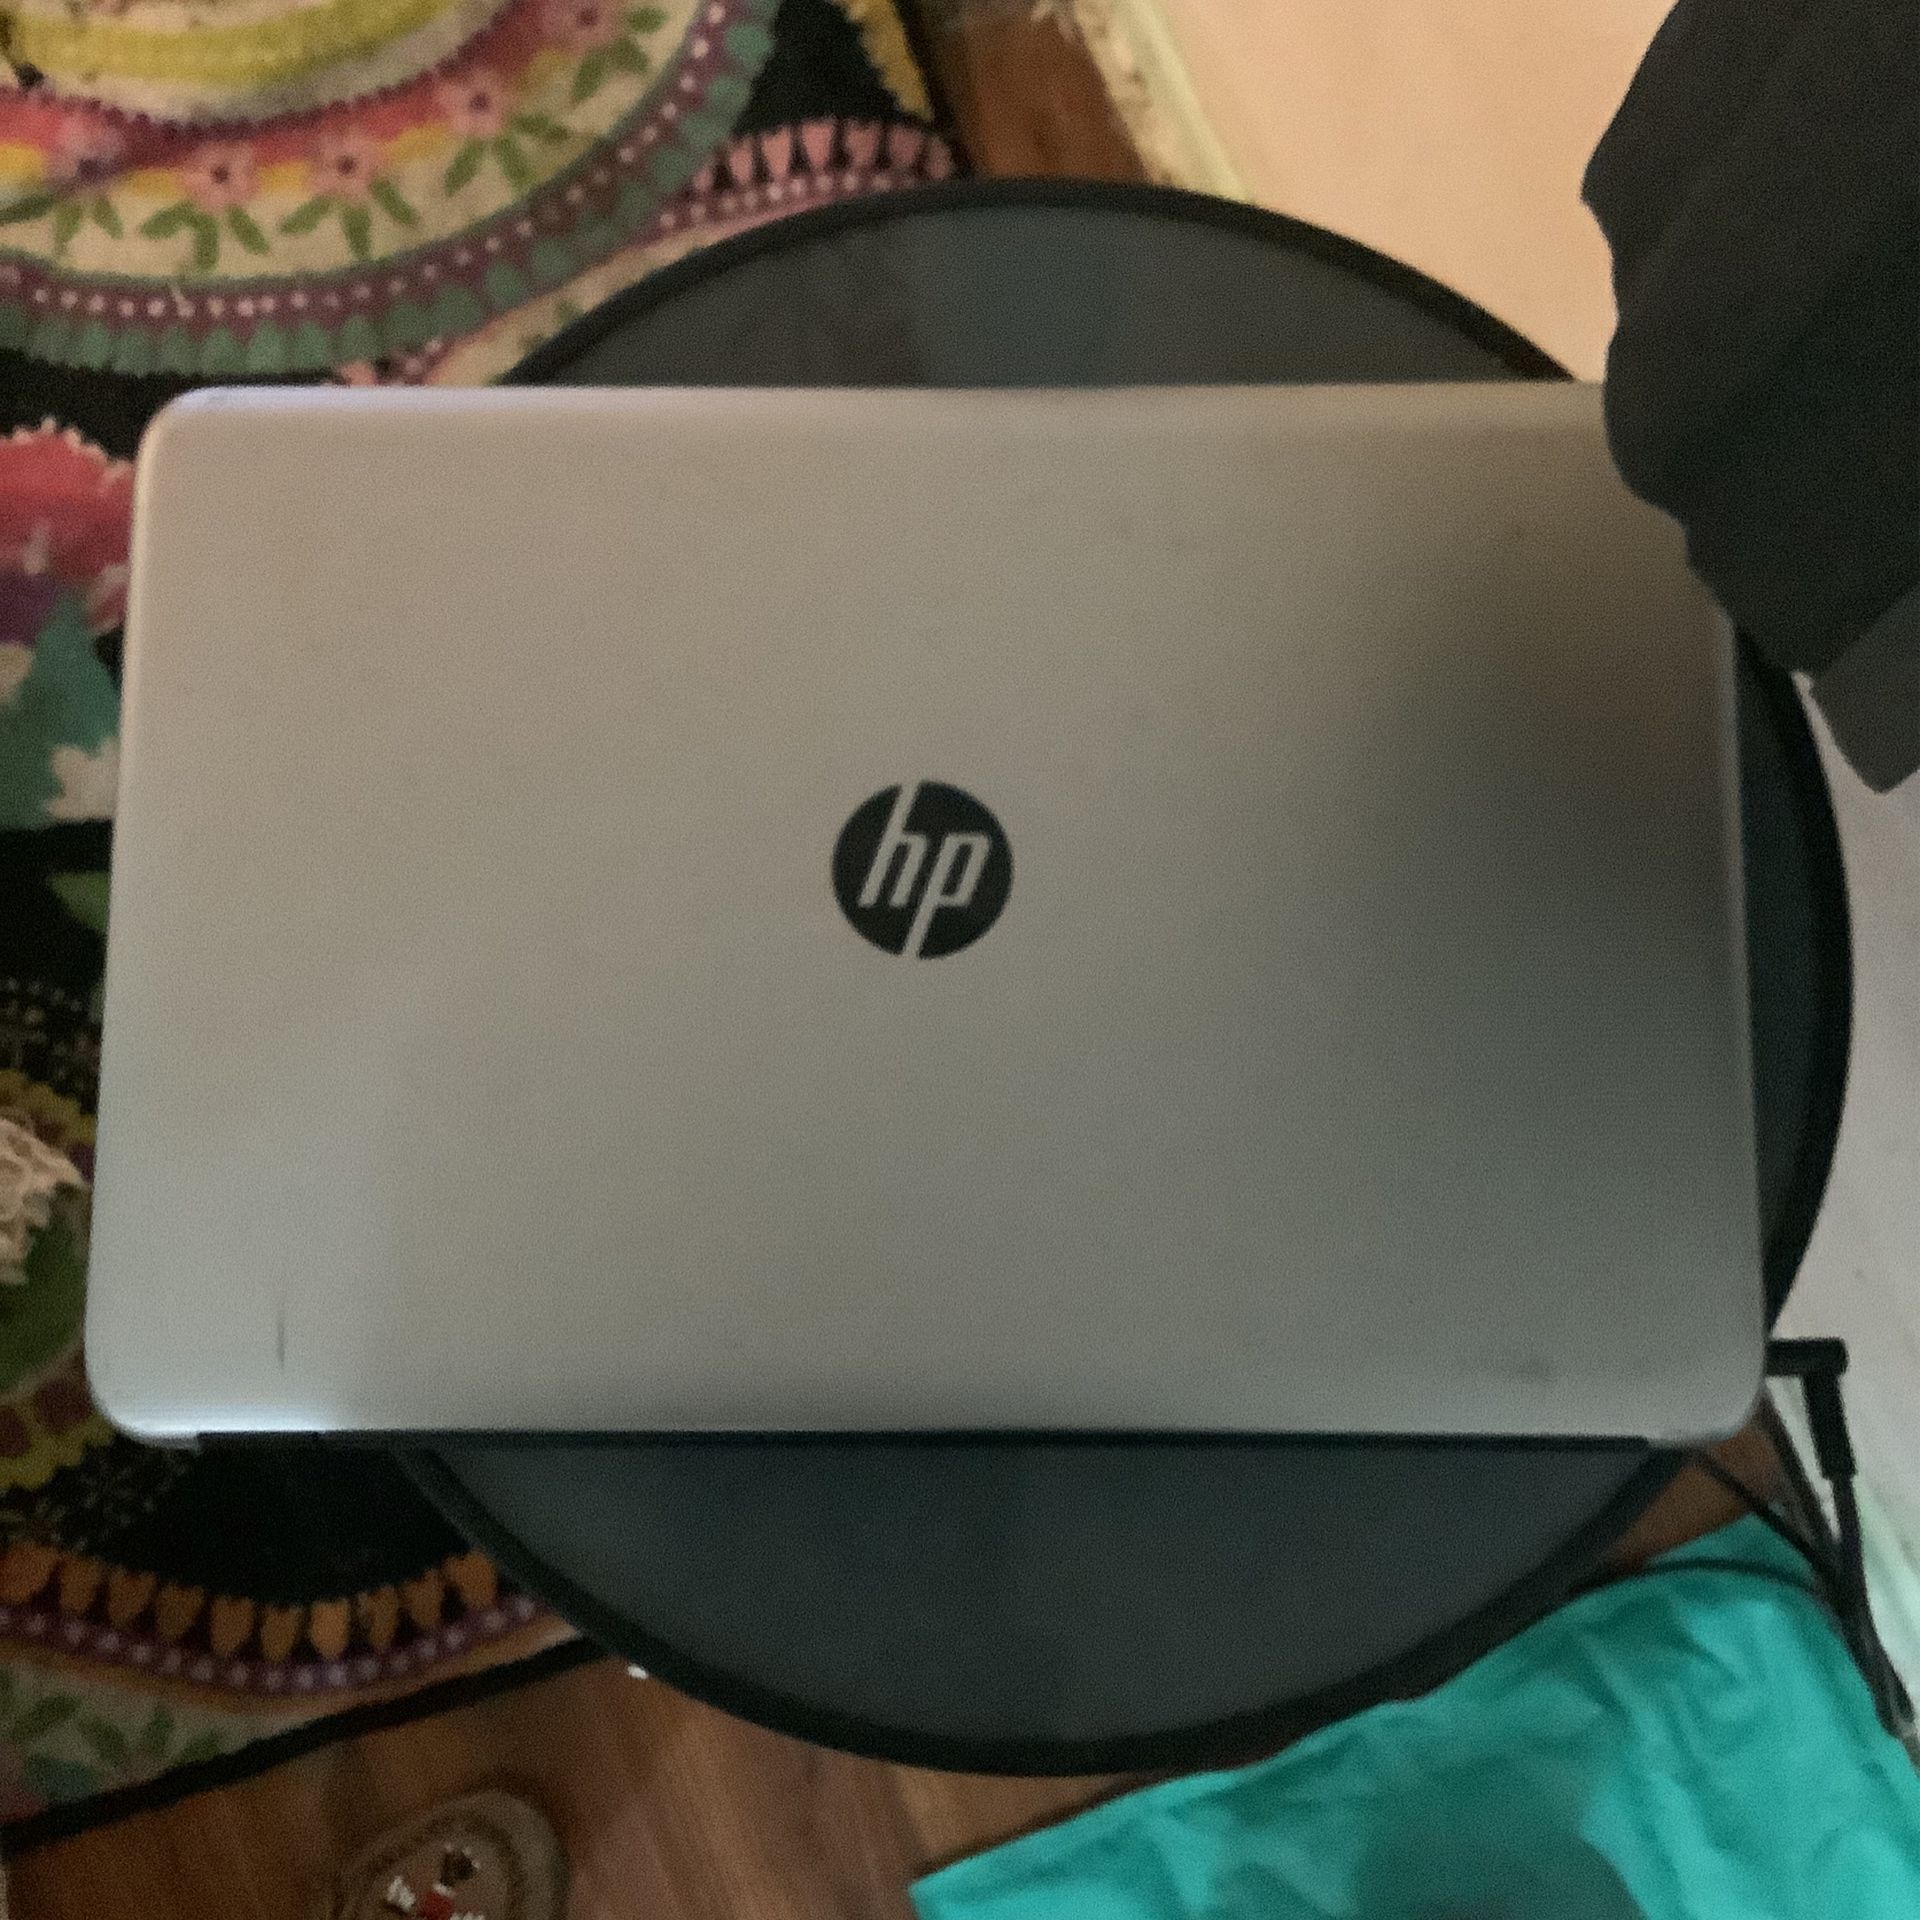 HP Laptop Notebook With 4GB Great For students!